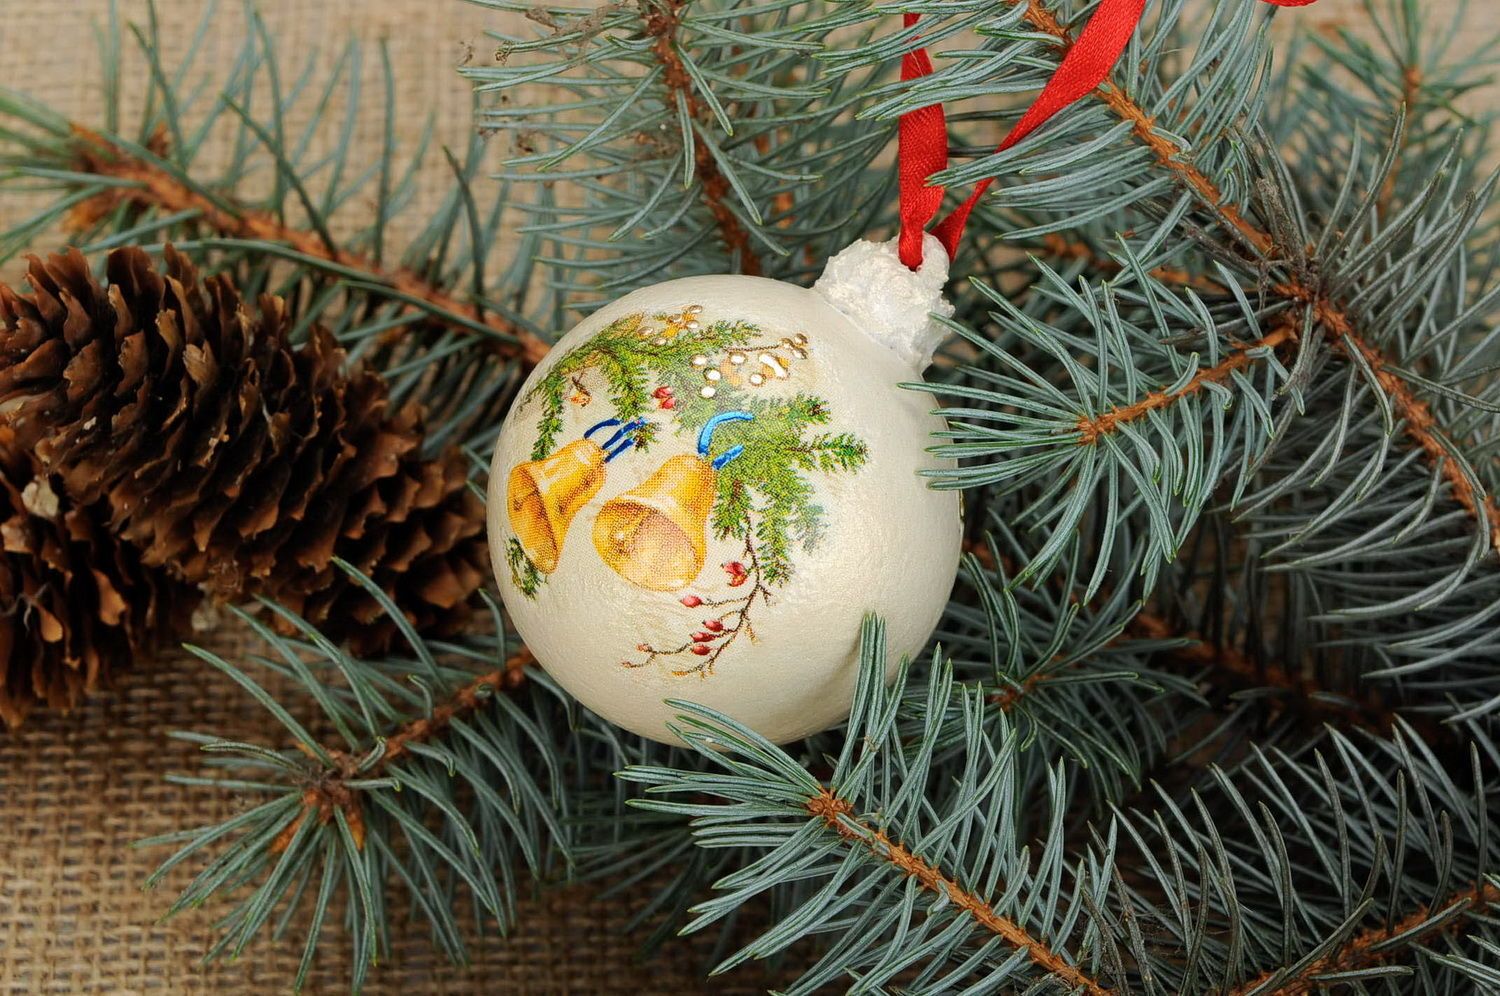 The decoration on the tree Bell photo 1